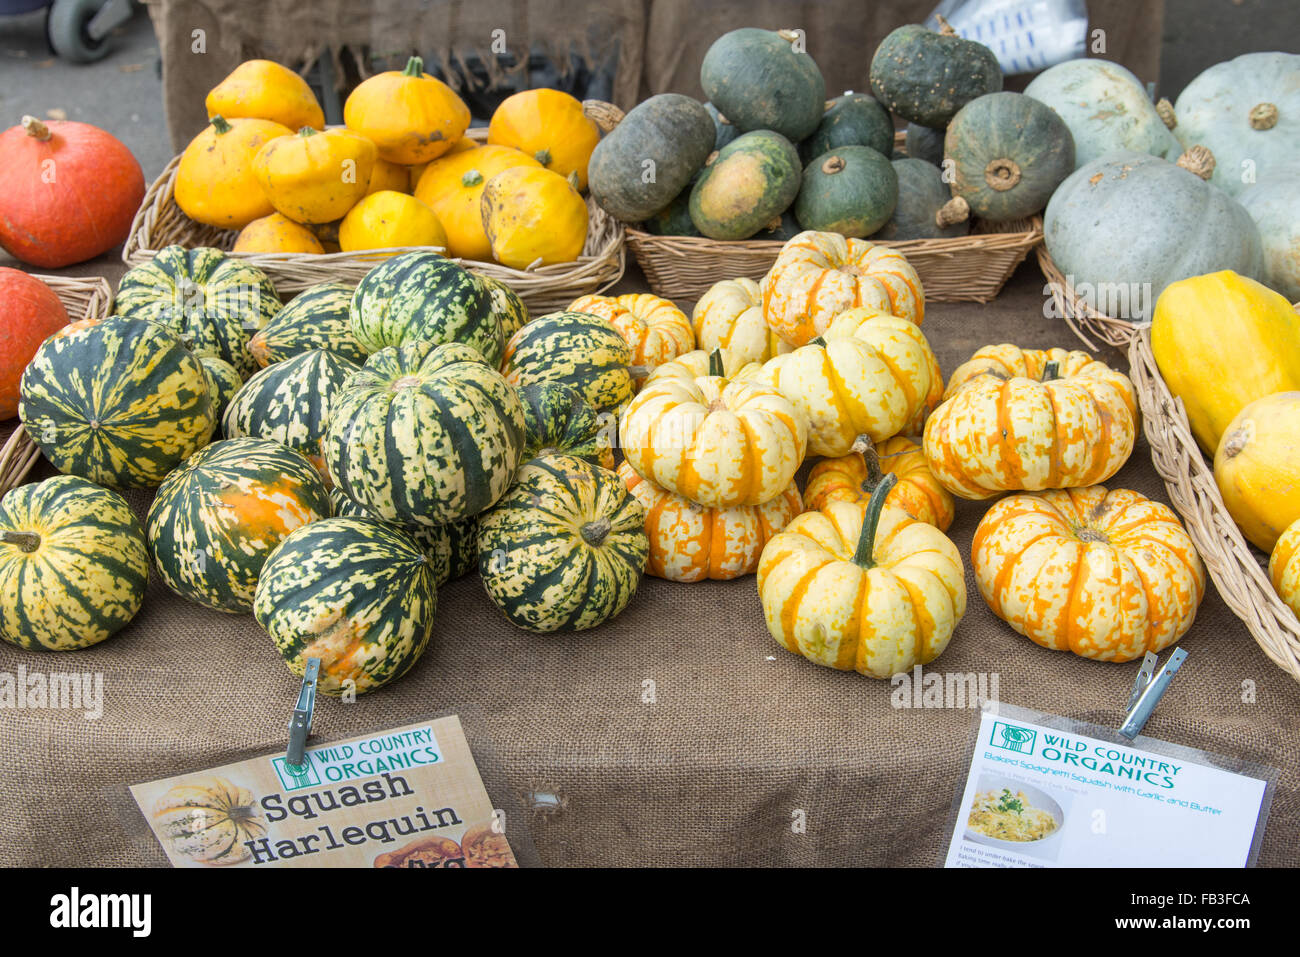 Squash for sale at an organic farmers market vegetable stall, London, England, UK Stock Photo